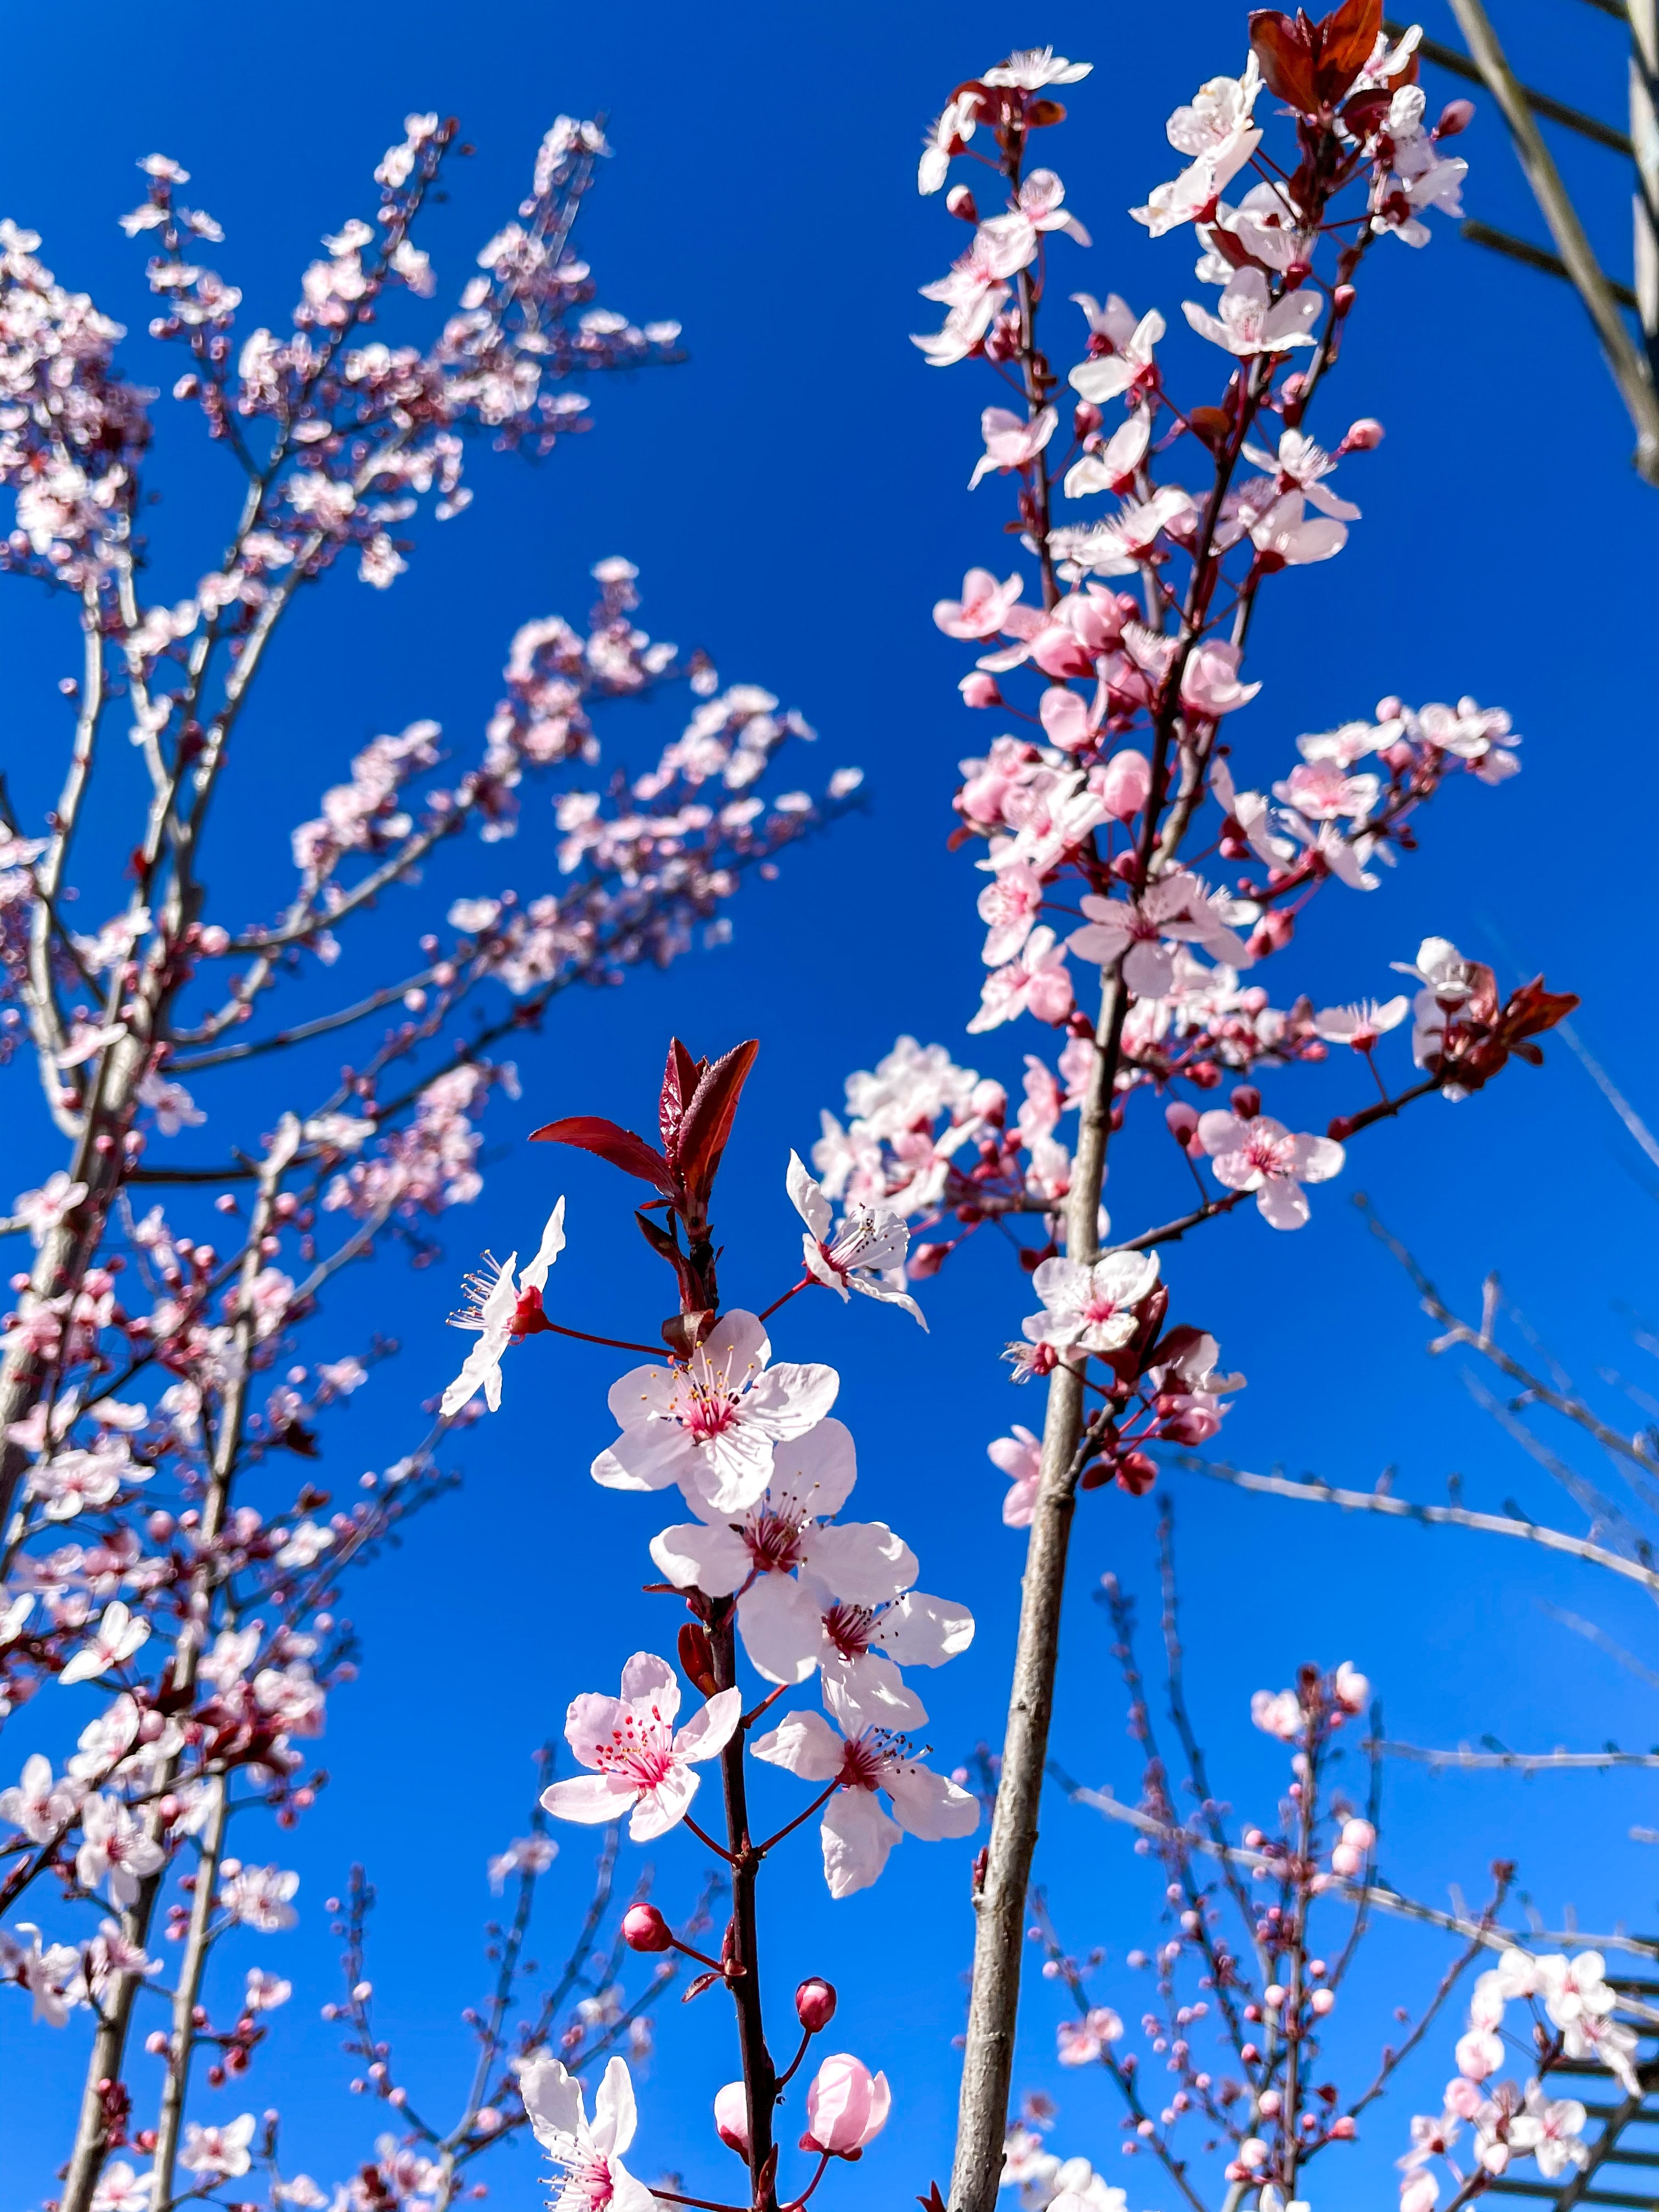 Best Mobile Cherry Blossom Backgrounds